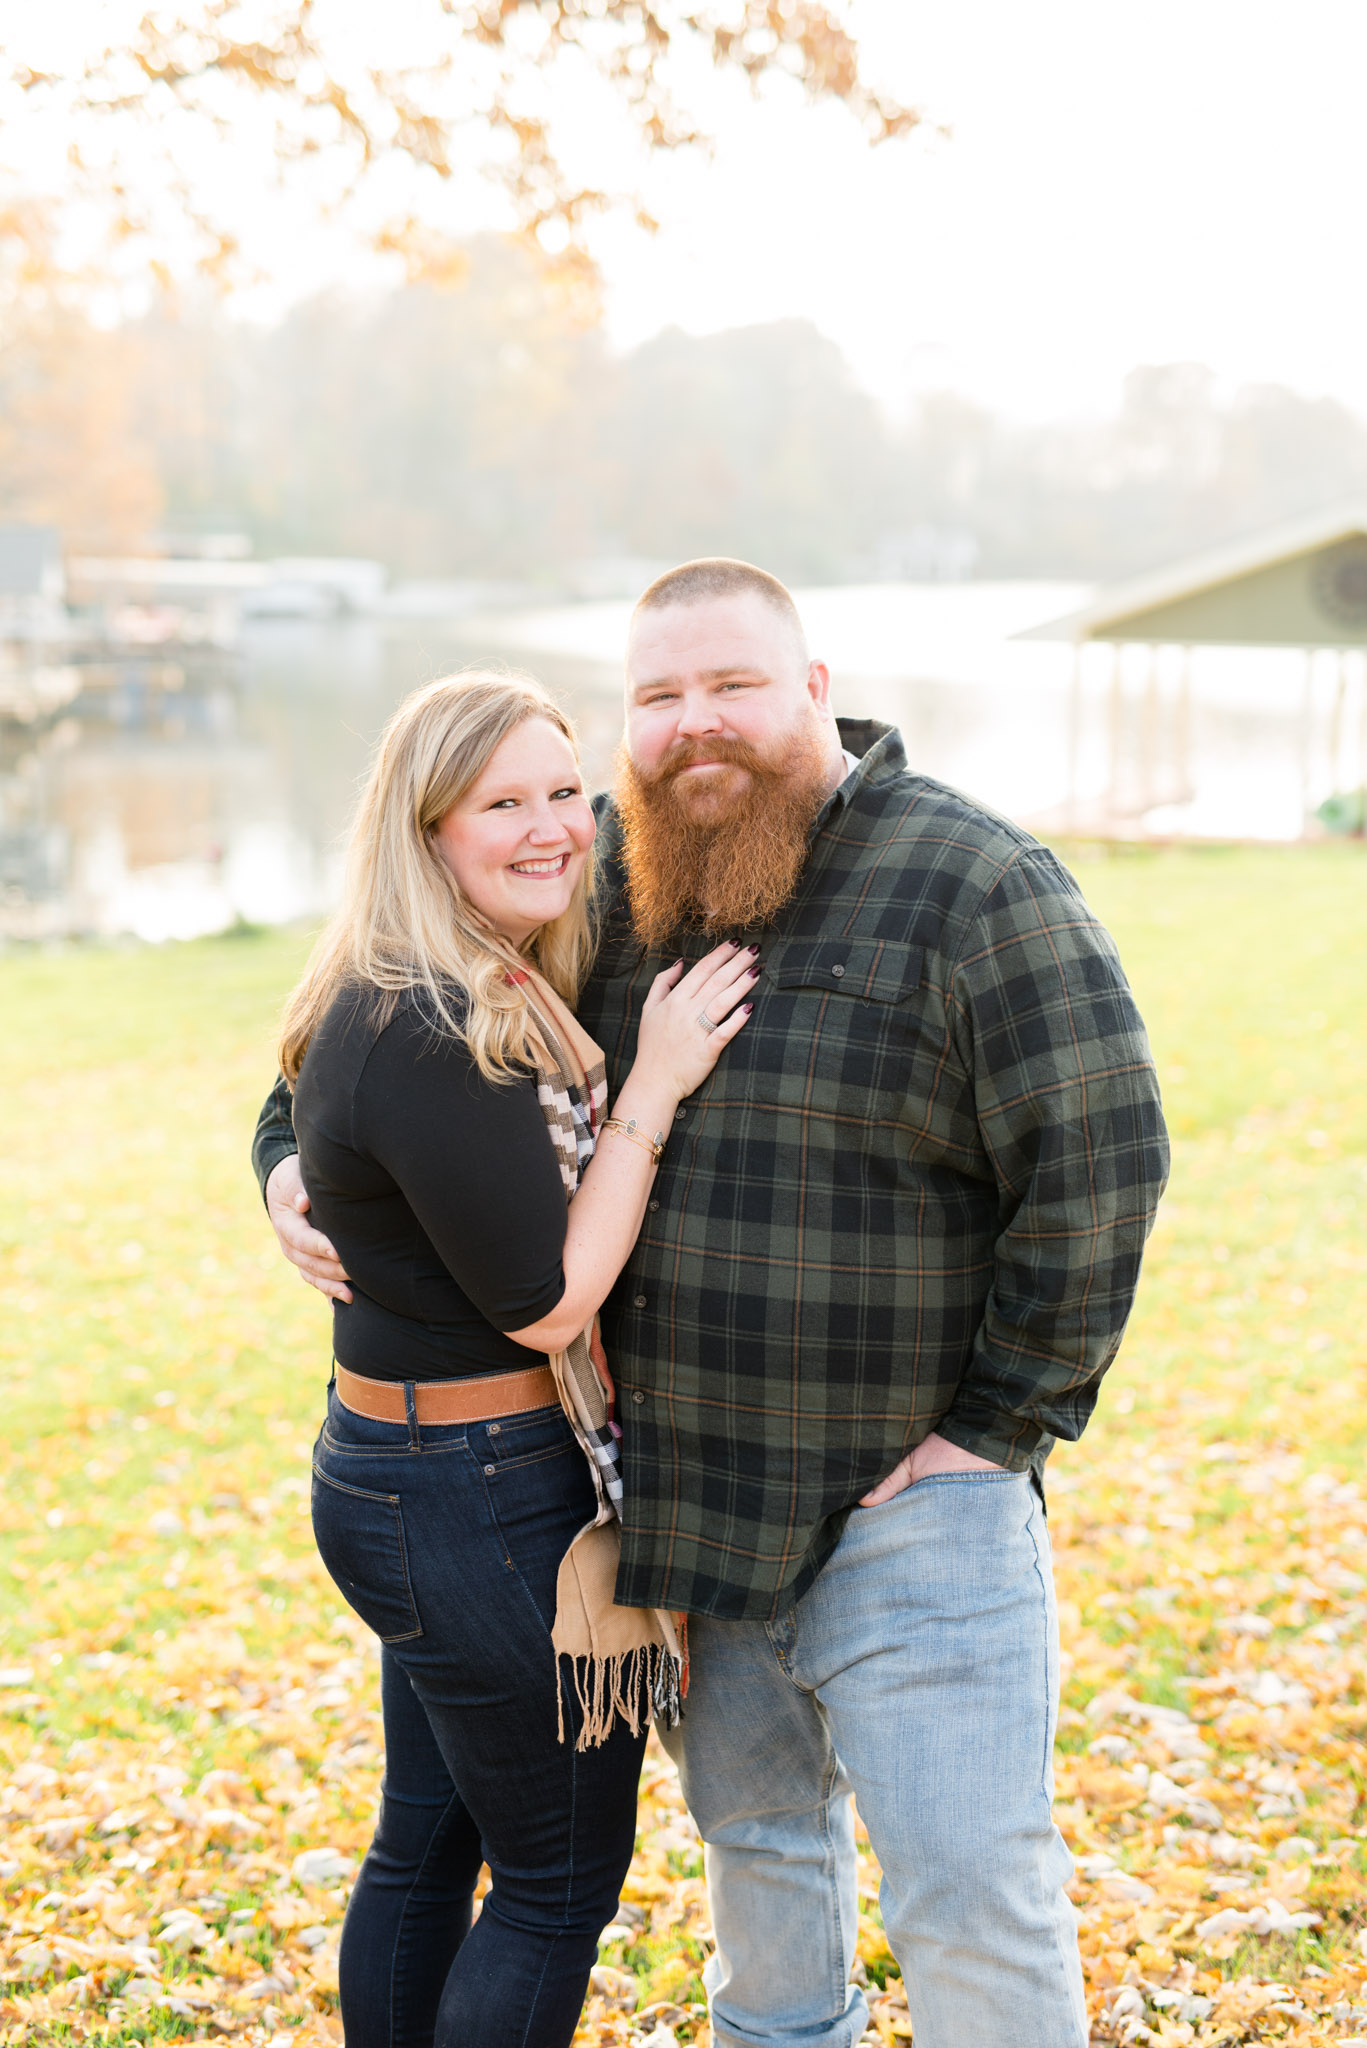 Engaged couple smiles at camera during fall.